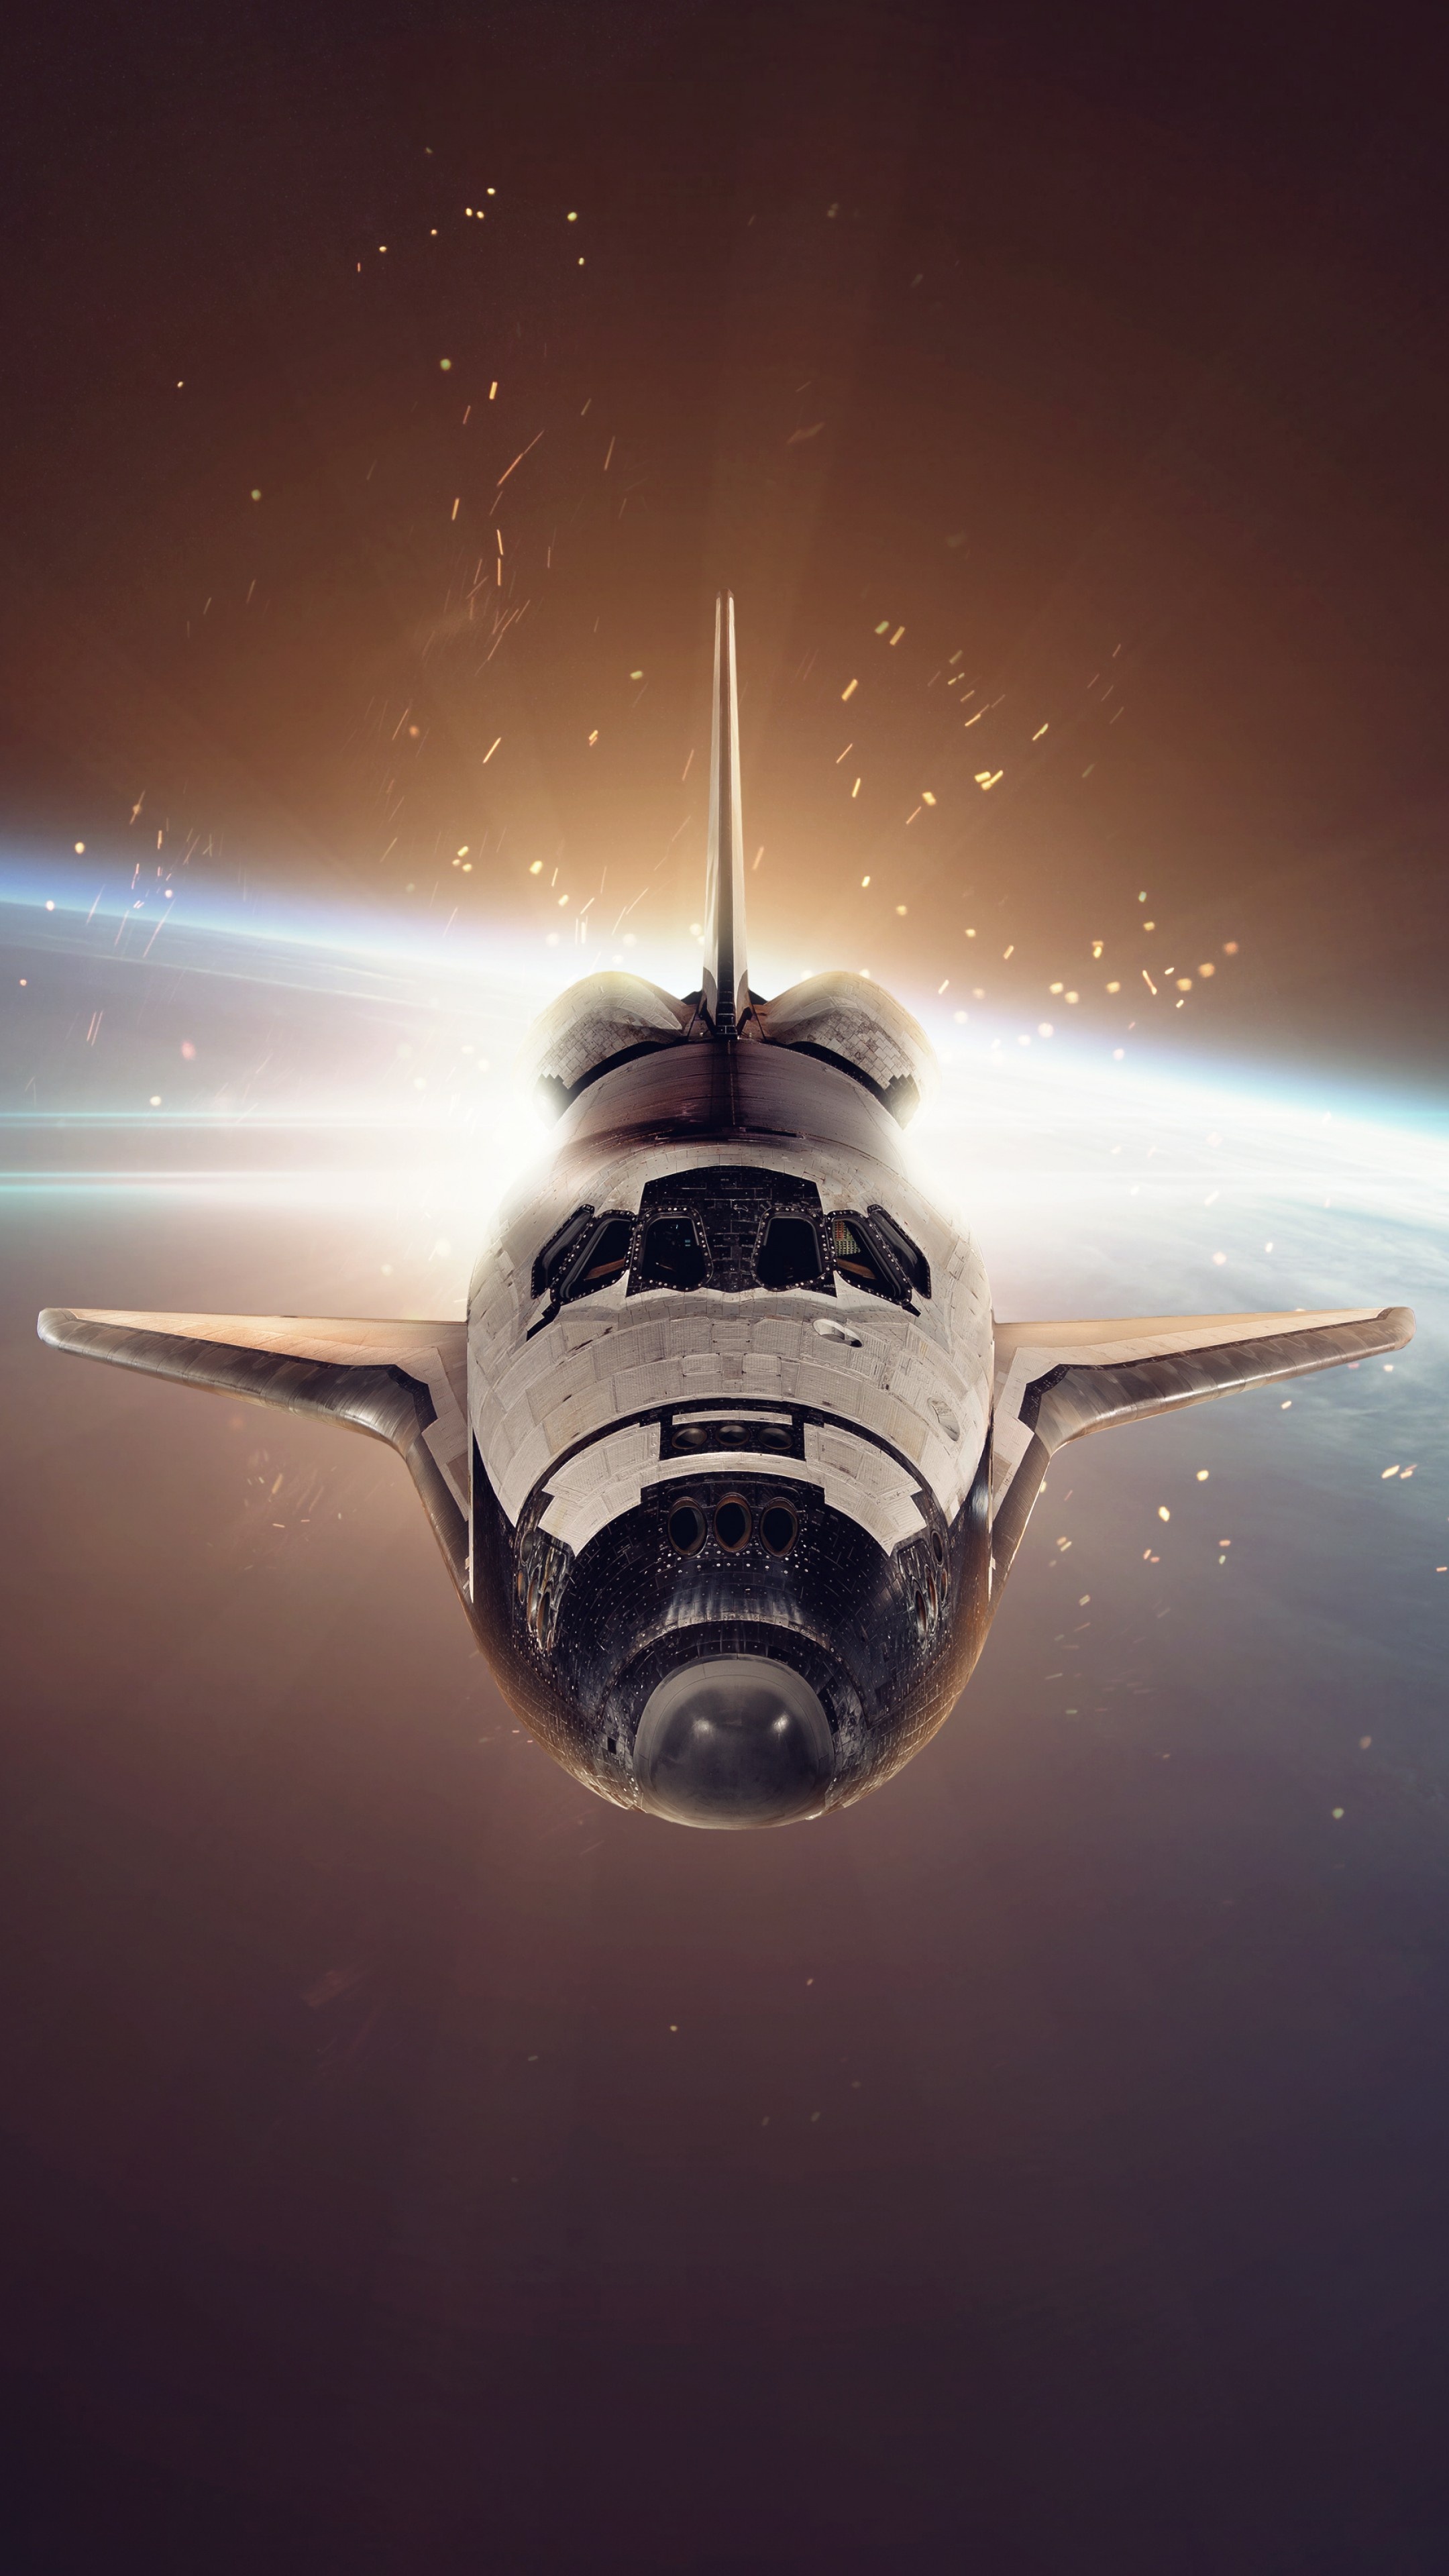 Starship: Space Shuttle, A retired, partially reusable low Earth orbital spacecraft system. 2160x3840 4K Wallpaper.